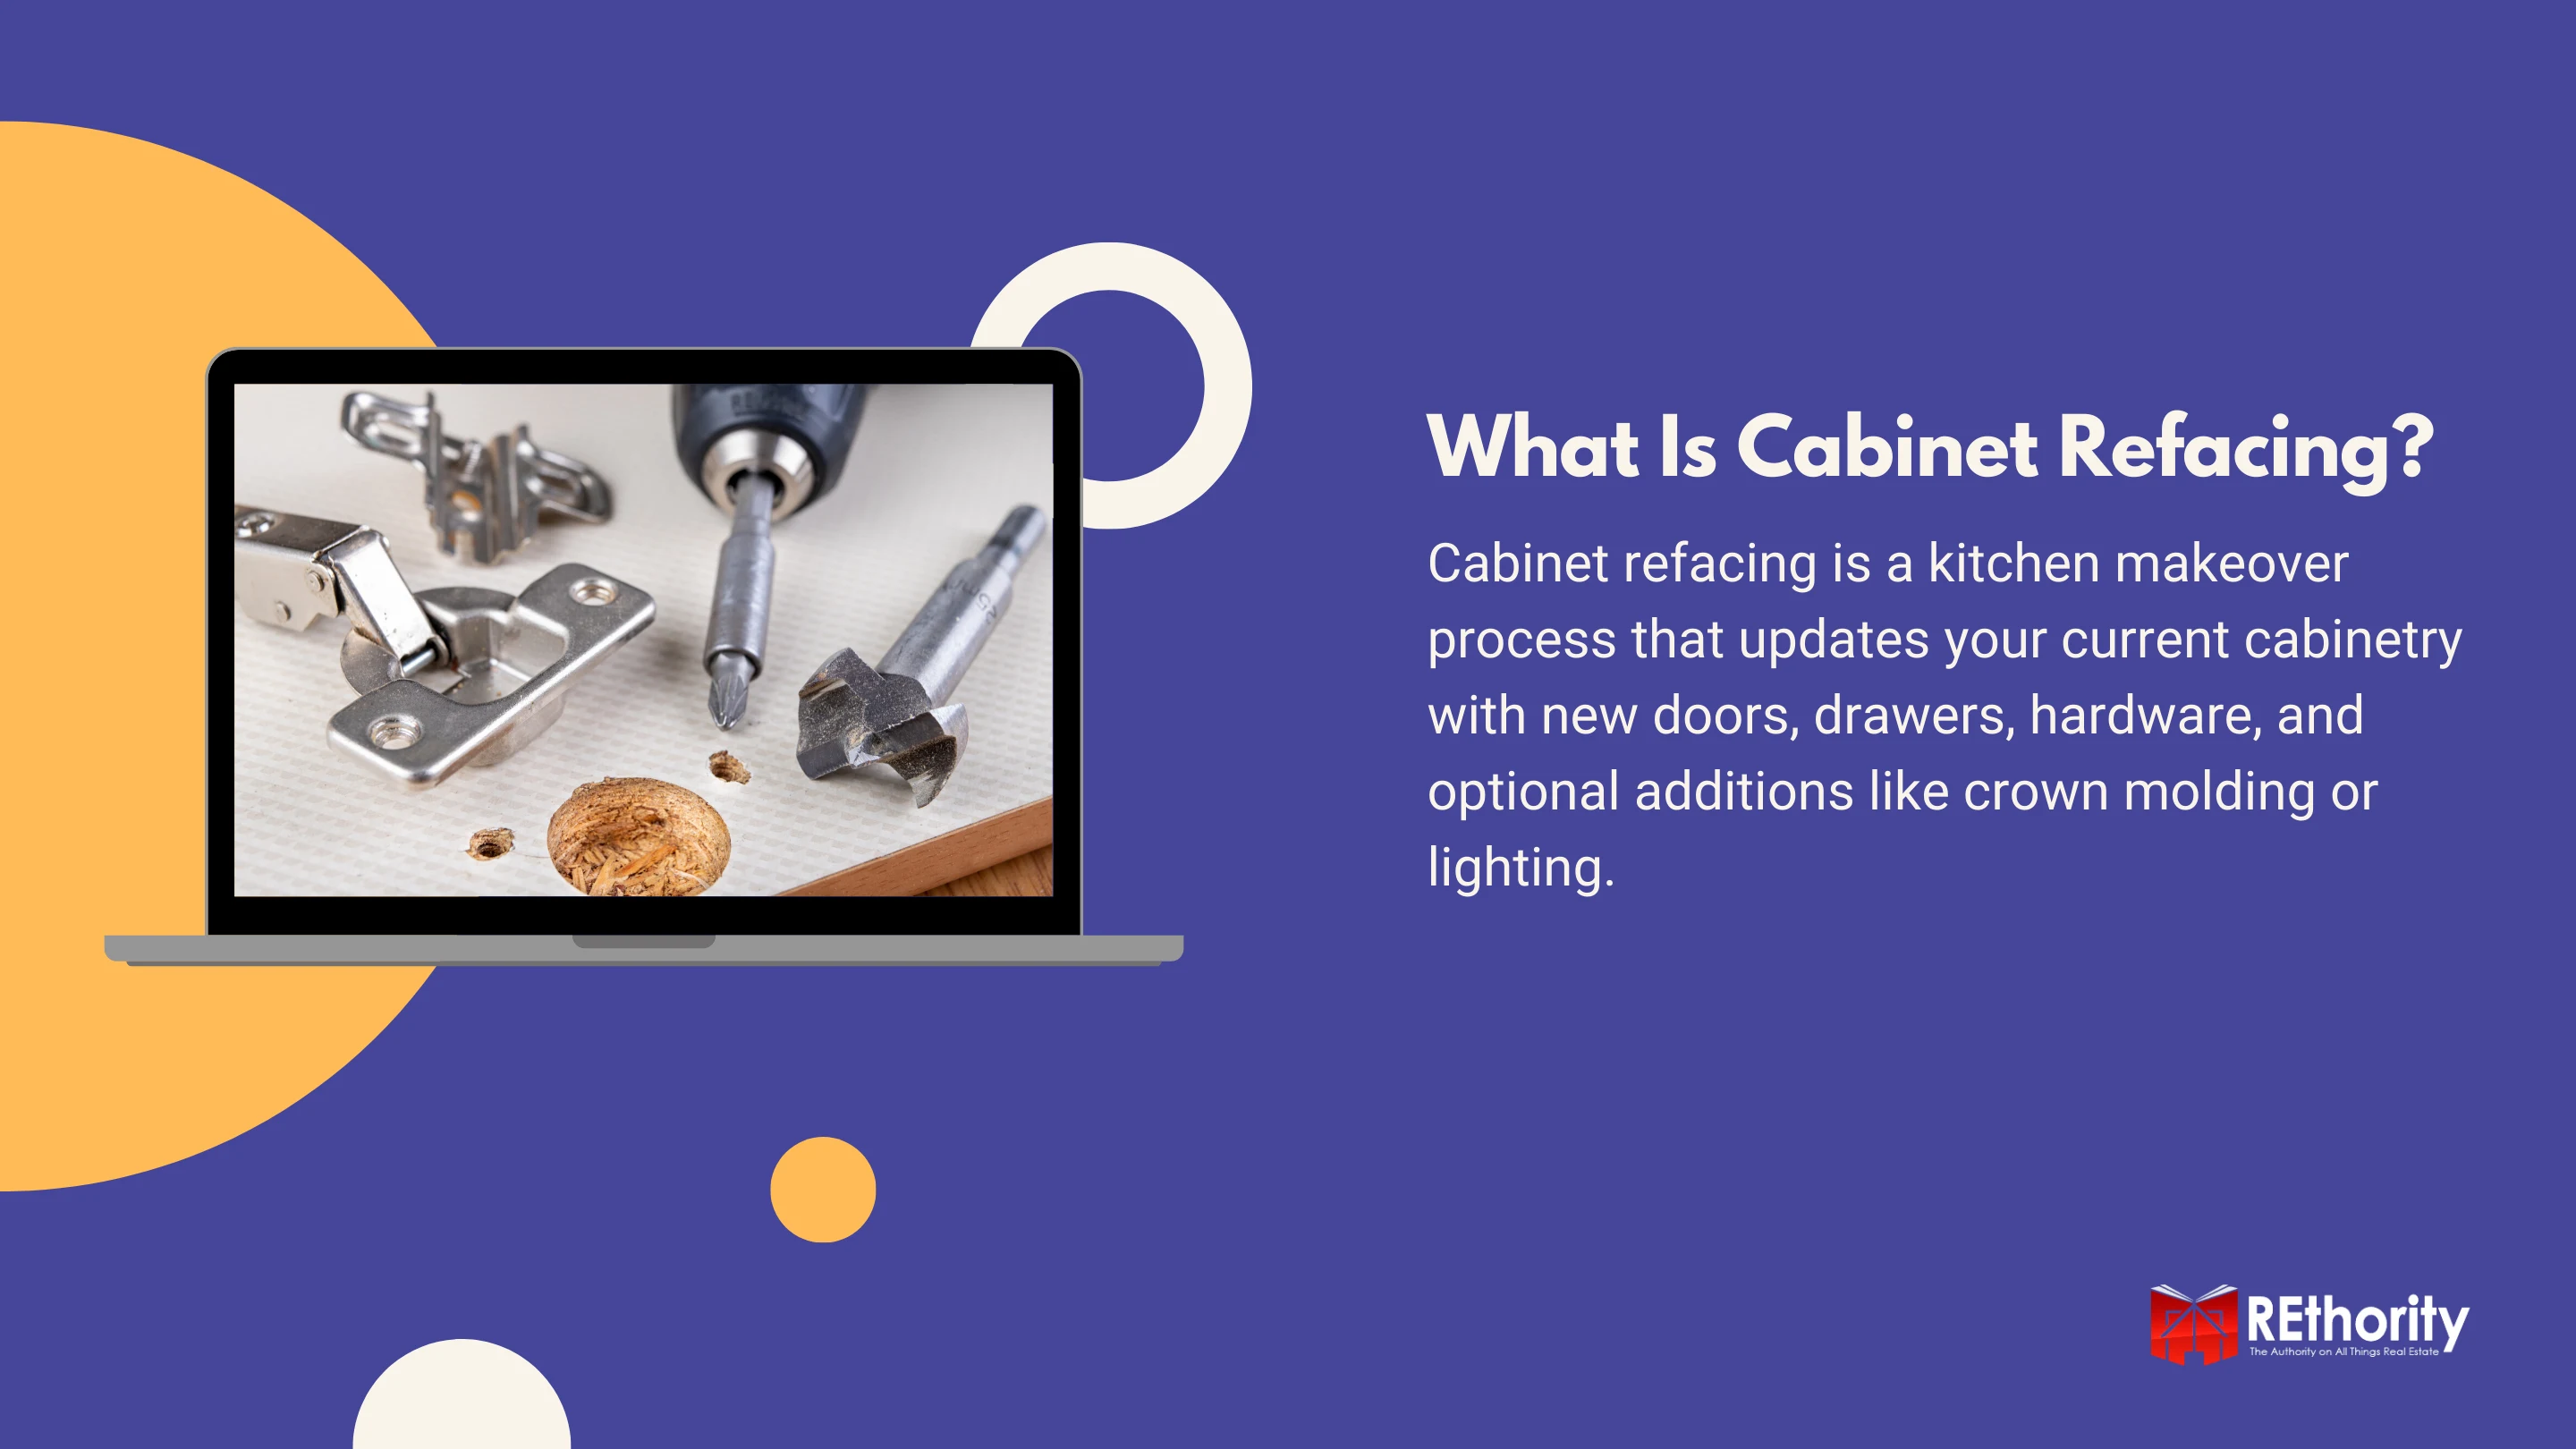 What is cabinet refacing with a photo of hinges and tools